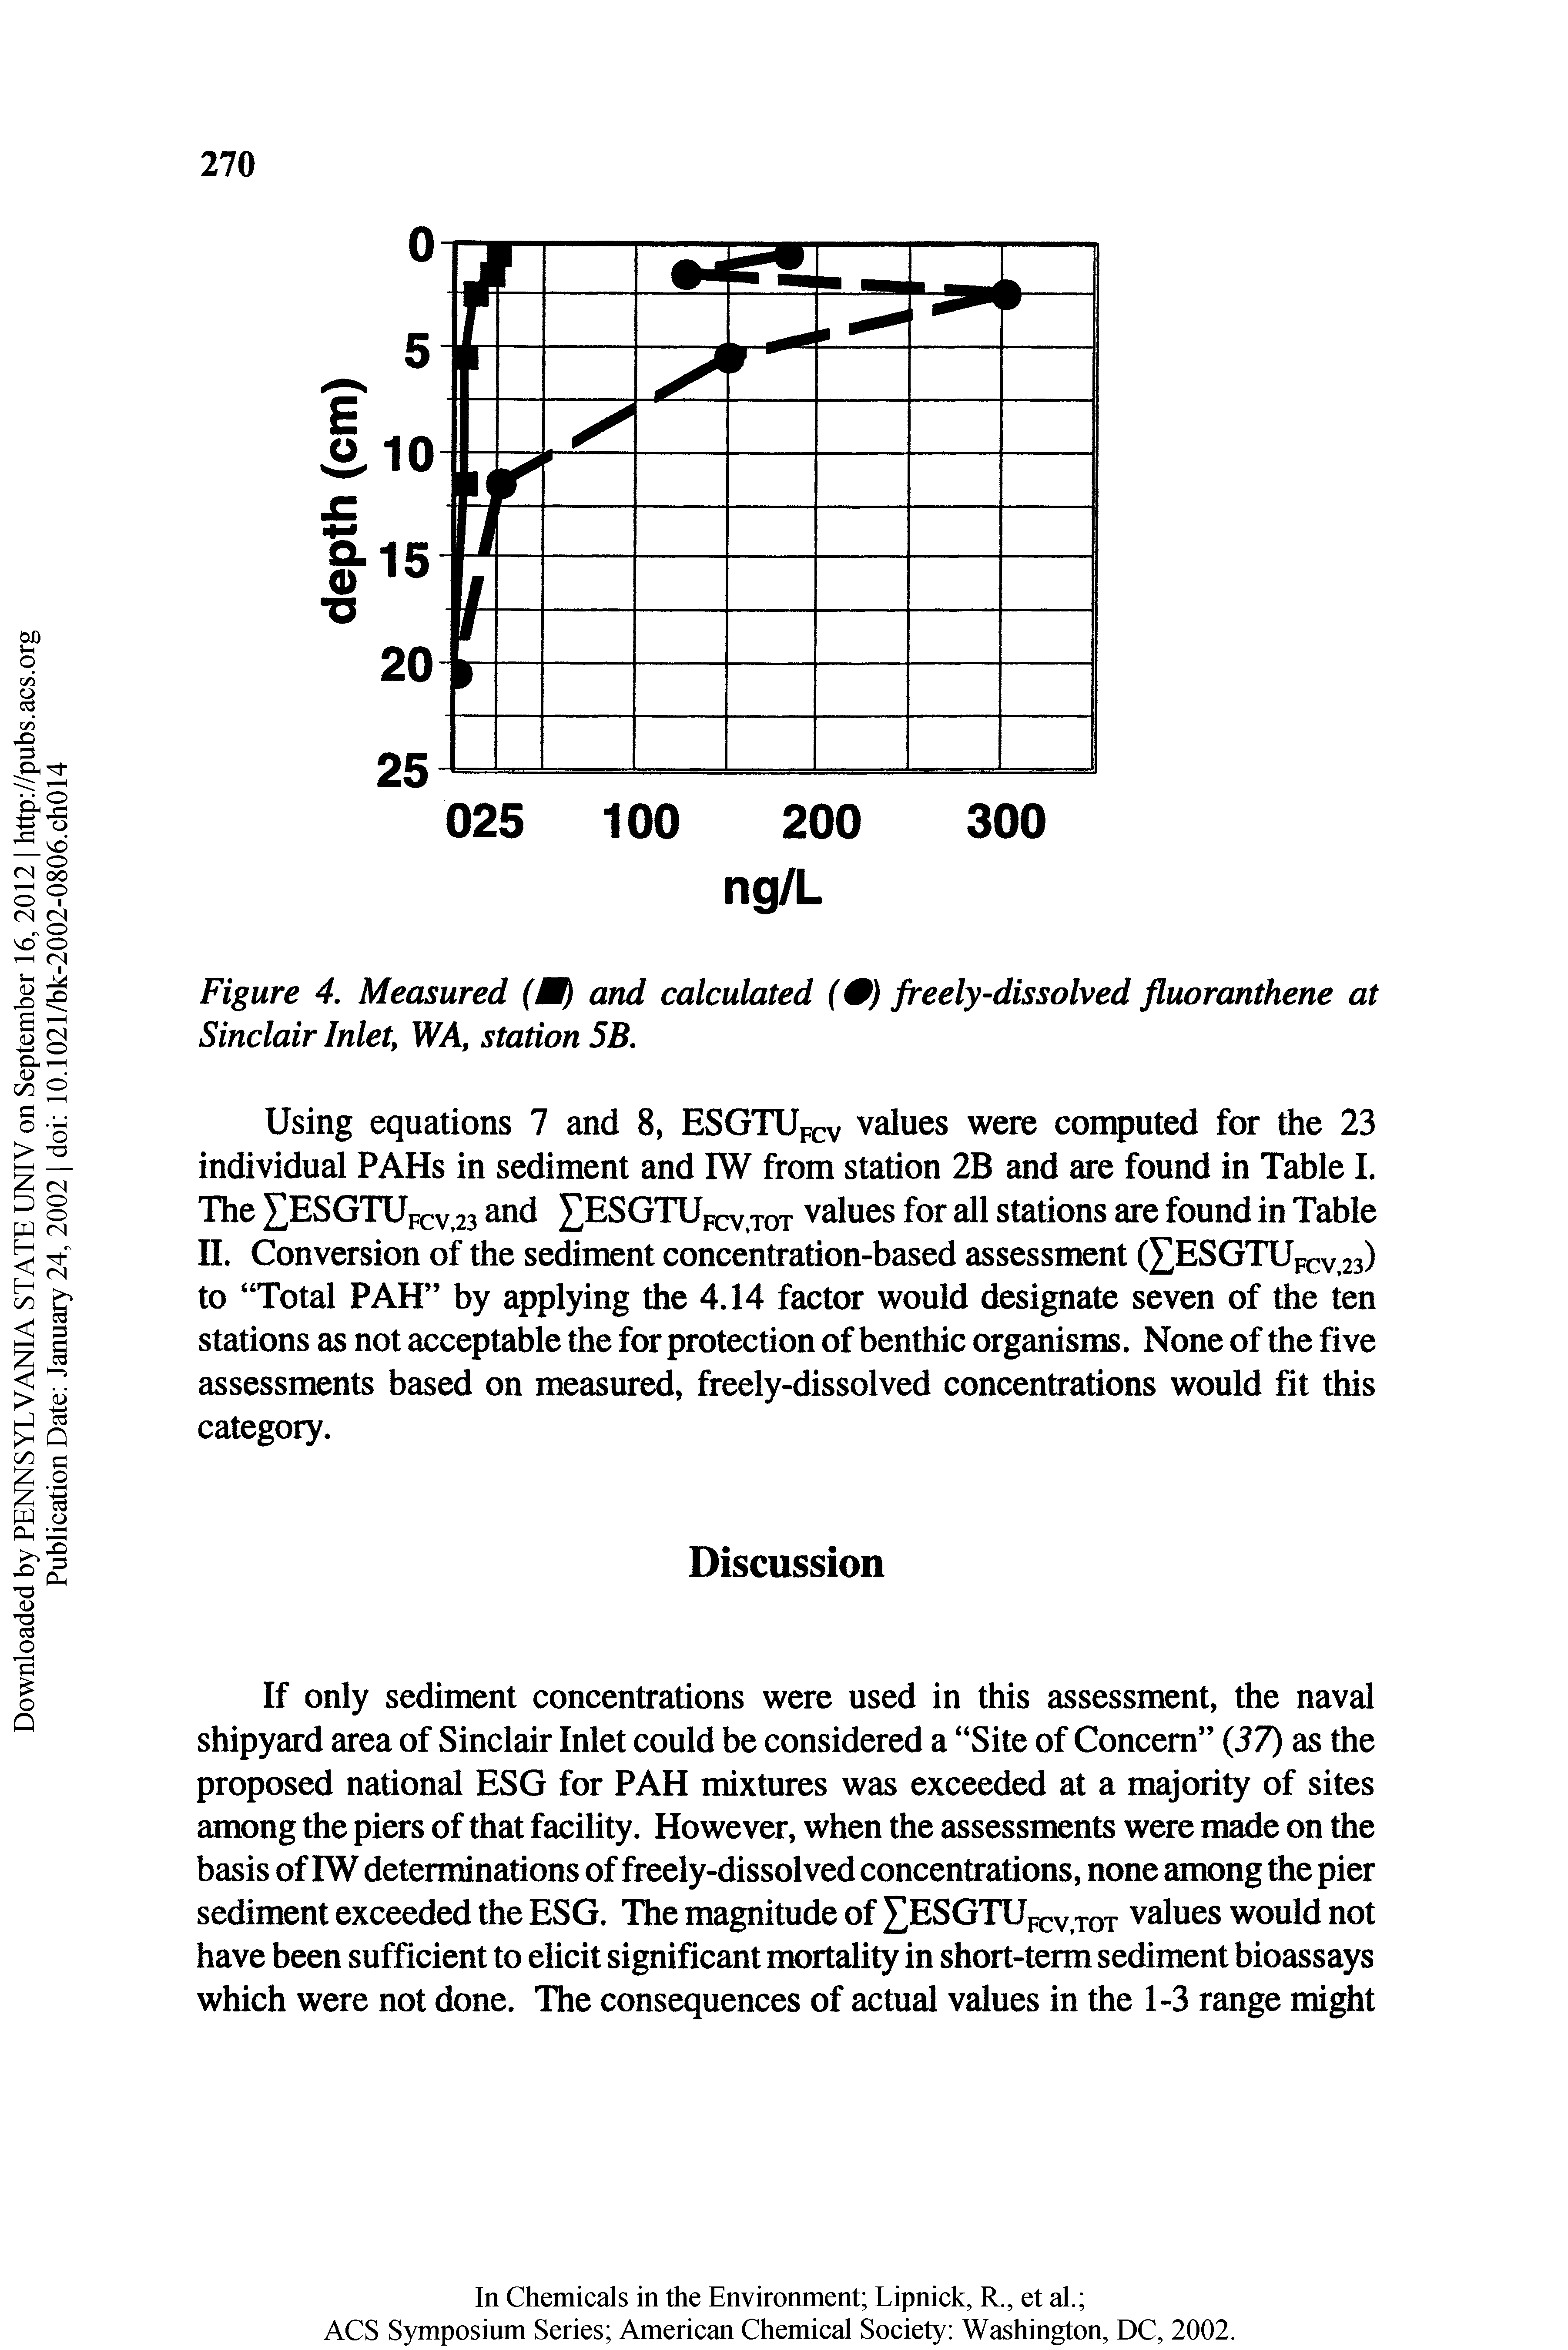 Figure 4, Measured (M and calculated (0) freely-dissolved fluoranthene at Sinclair Inlet, WA, station 5B.